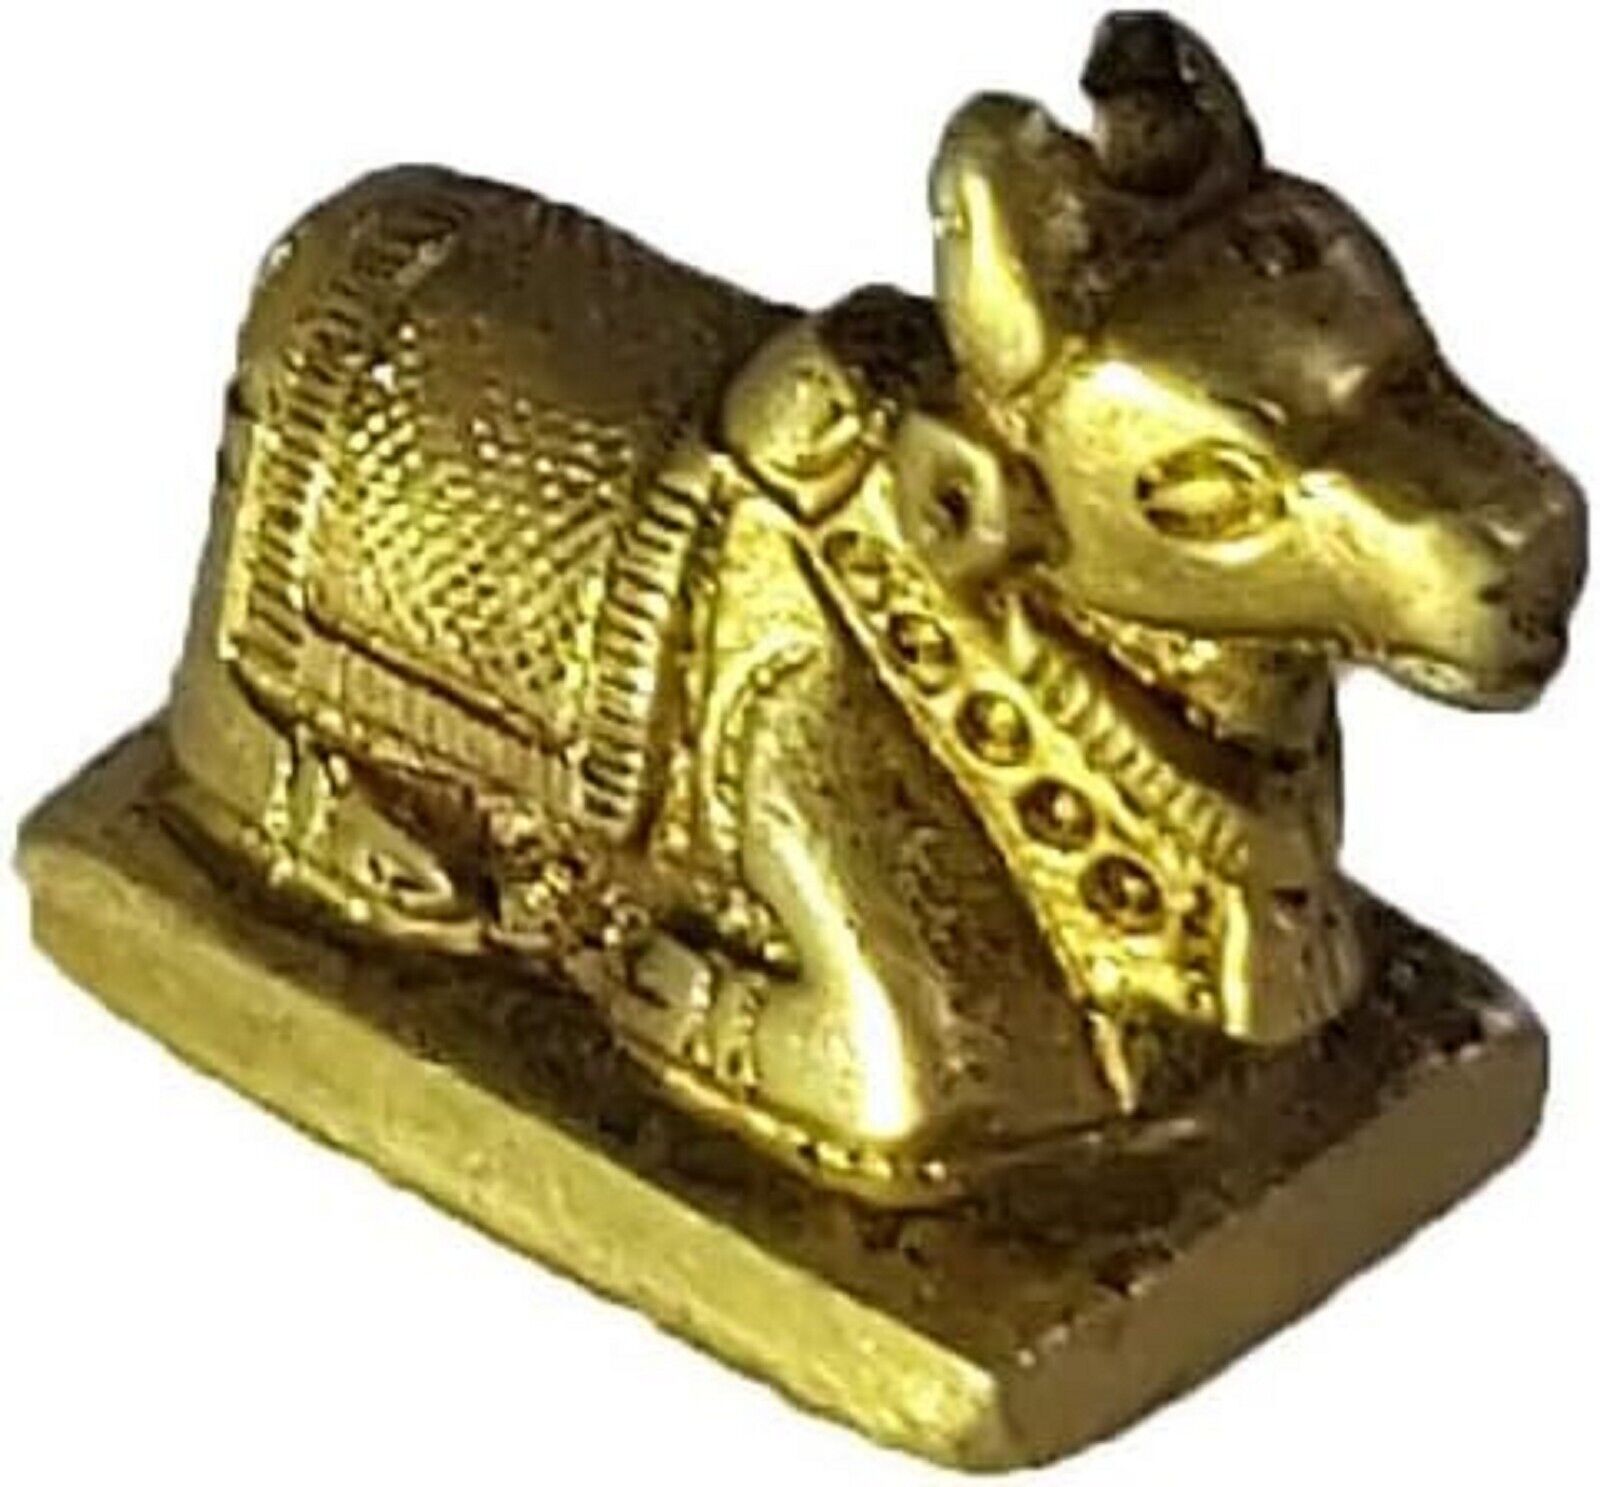 Nandi Idol Pooja Statue for Brass Indian Traditional For Home office puja 1.5 in